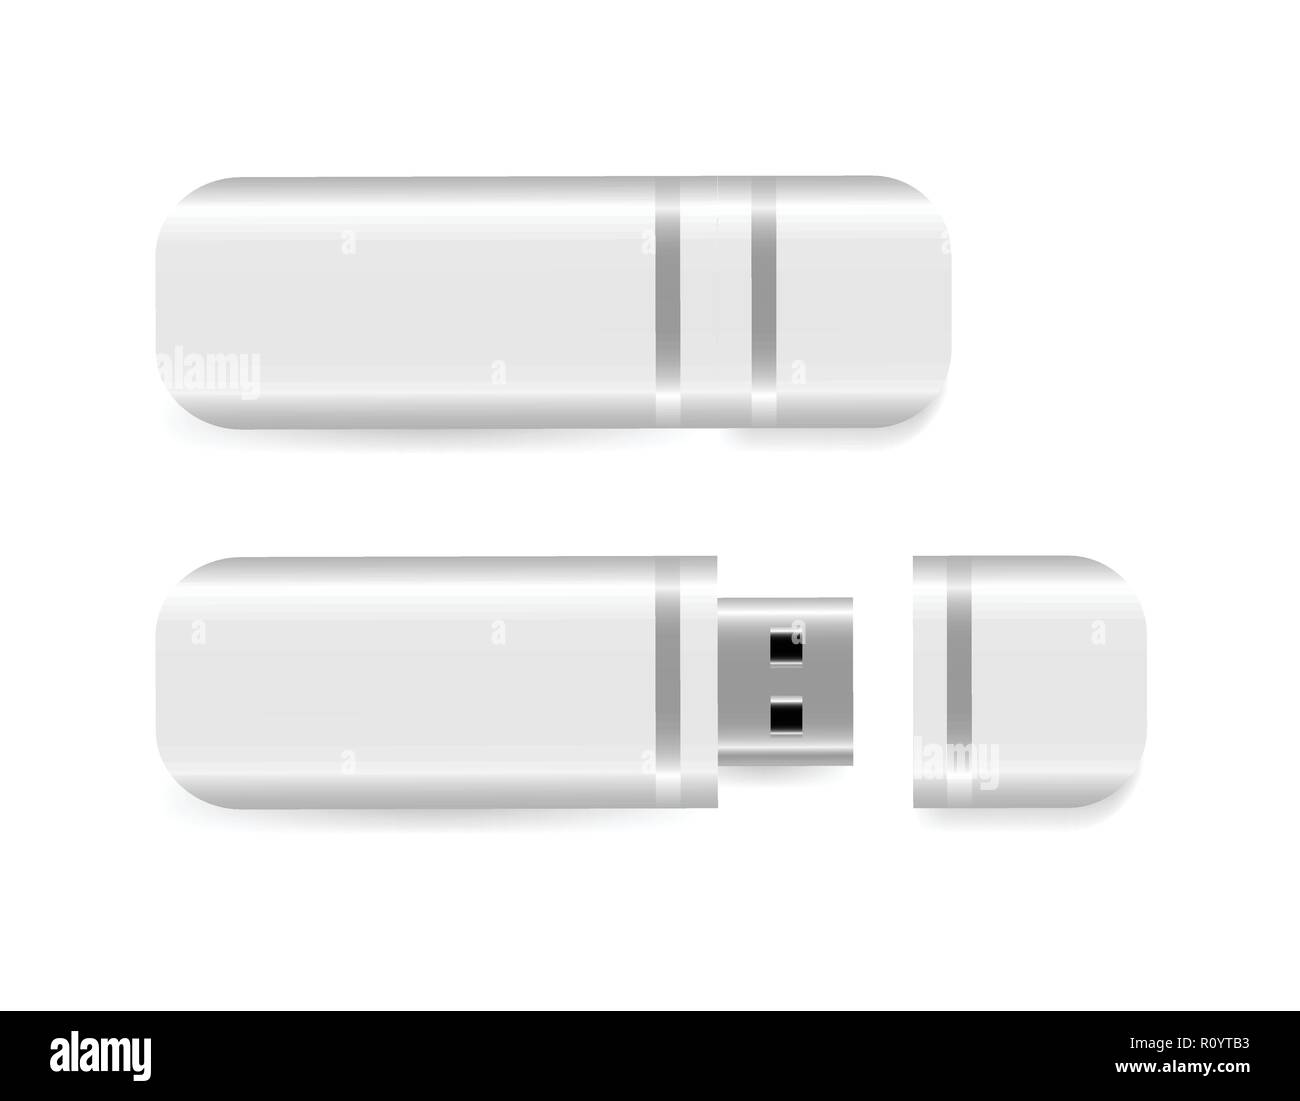 USB Flash Drive isolated on white background. Vector illustration Stock Vector